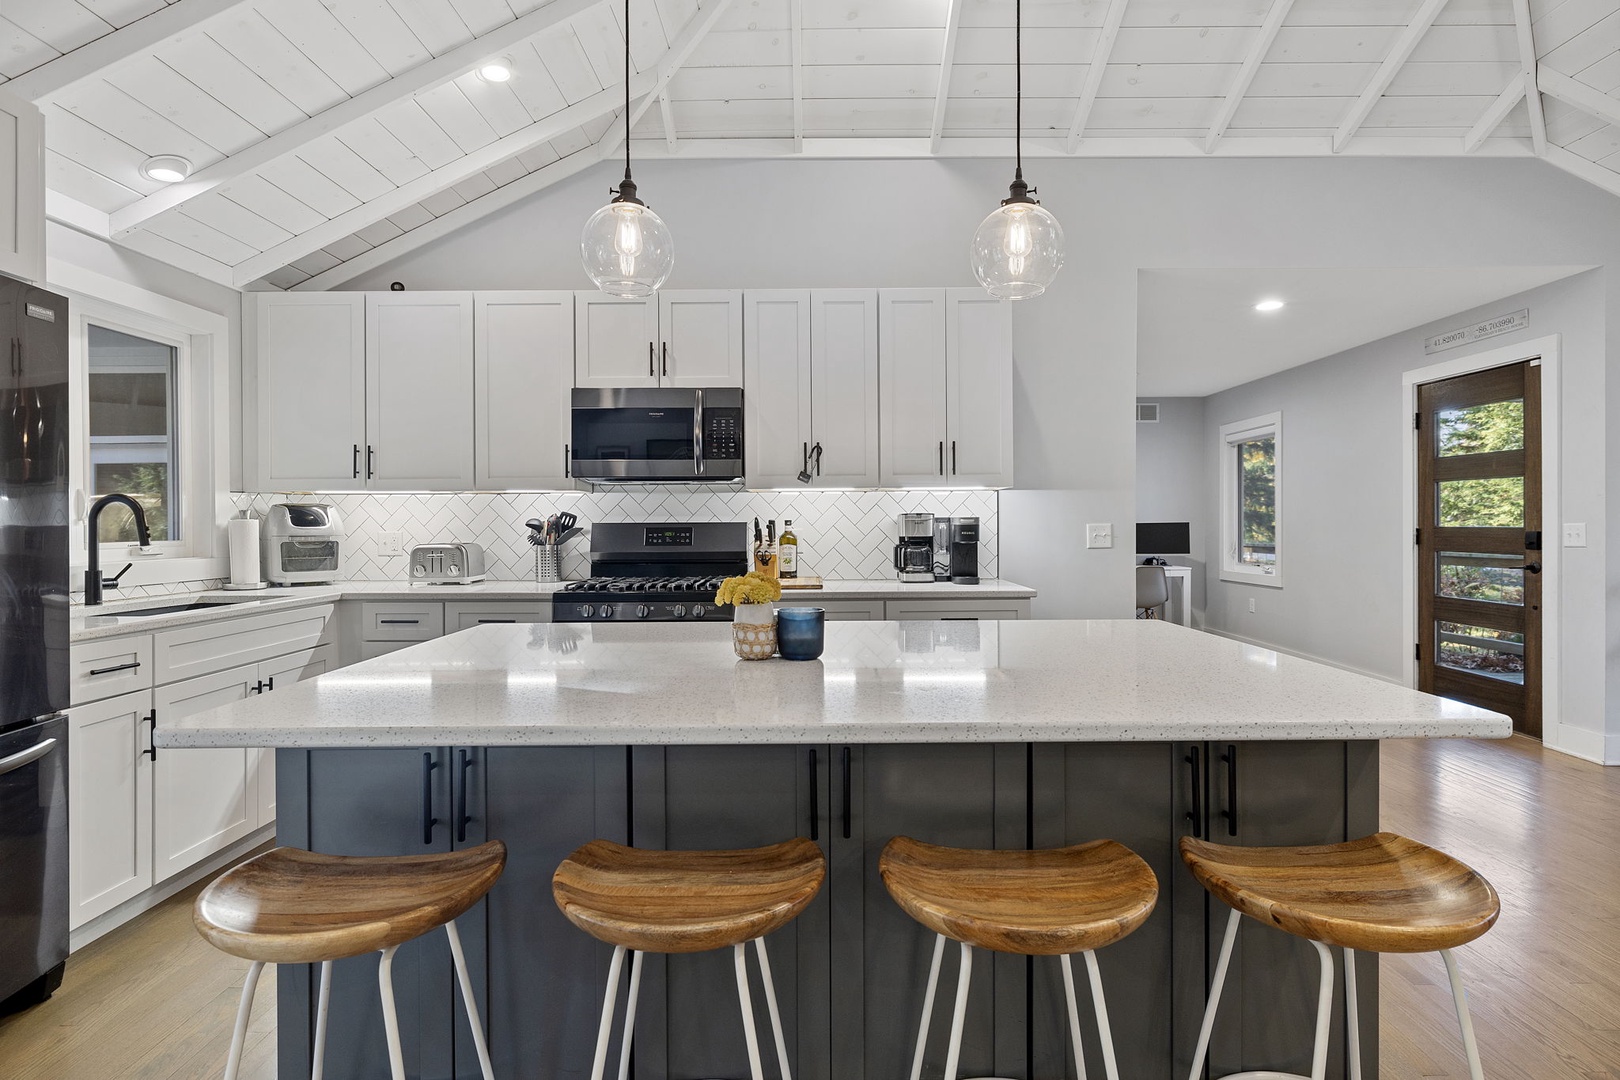 The wraparound kitchen with a handsome central island is a cool gathering spot.